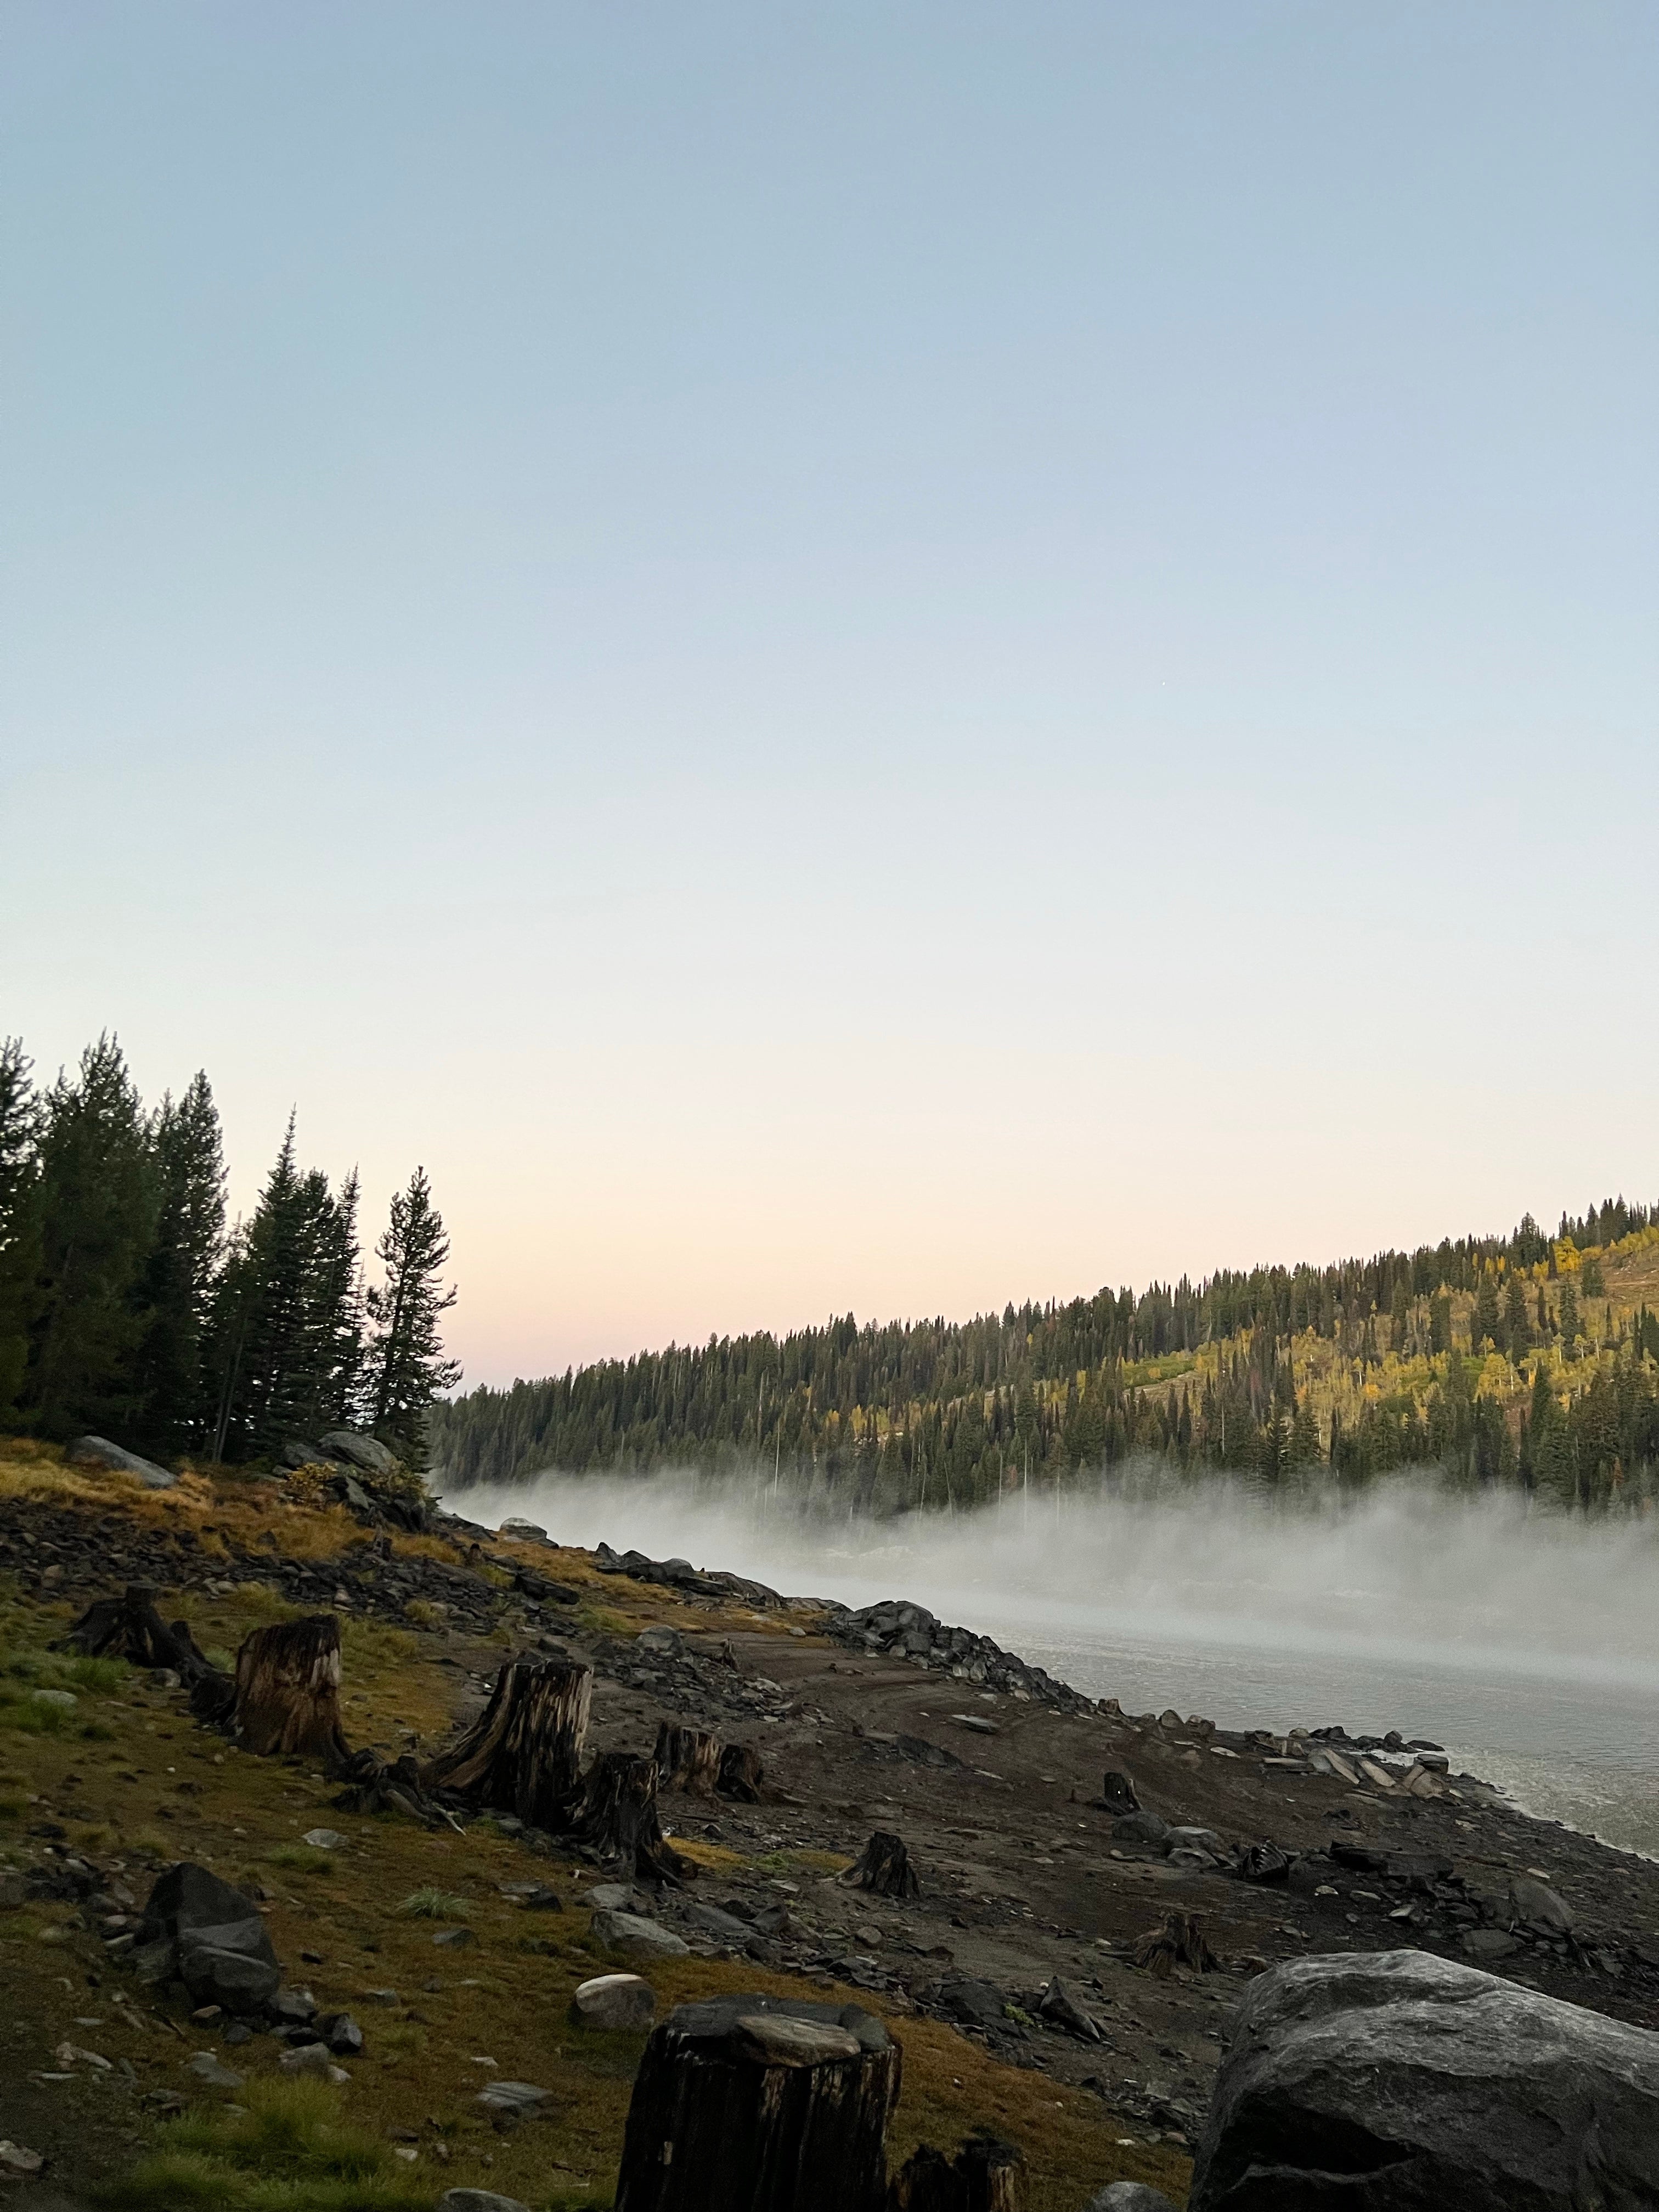 Camper submitted image from Brundage Reservoir Camping Area - 1